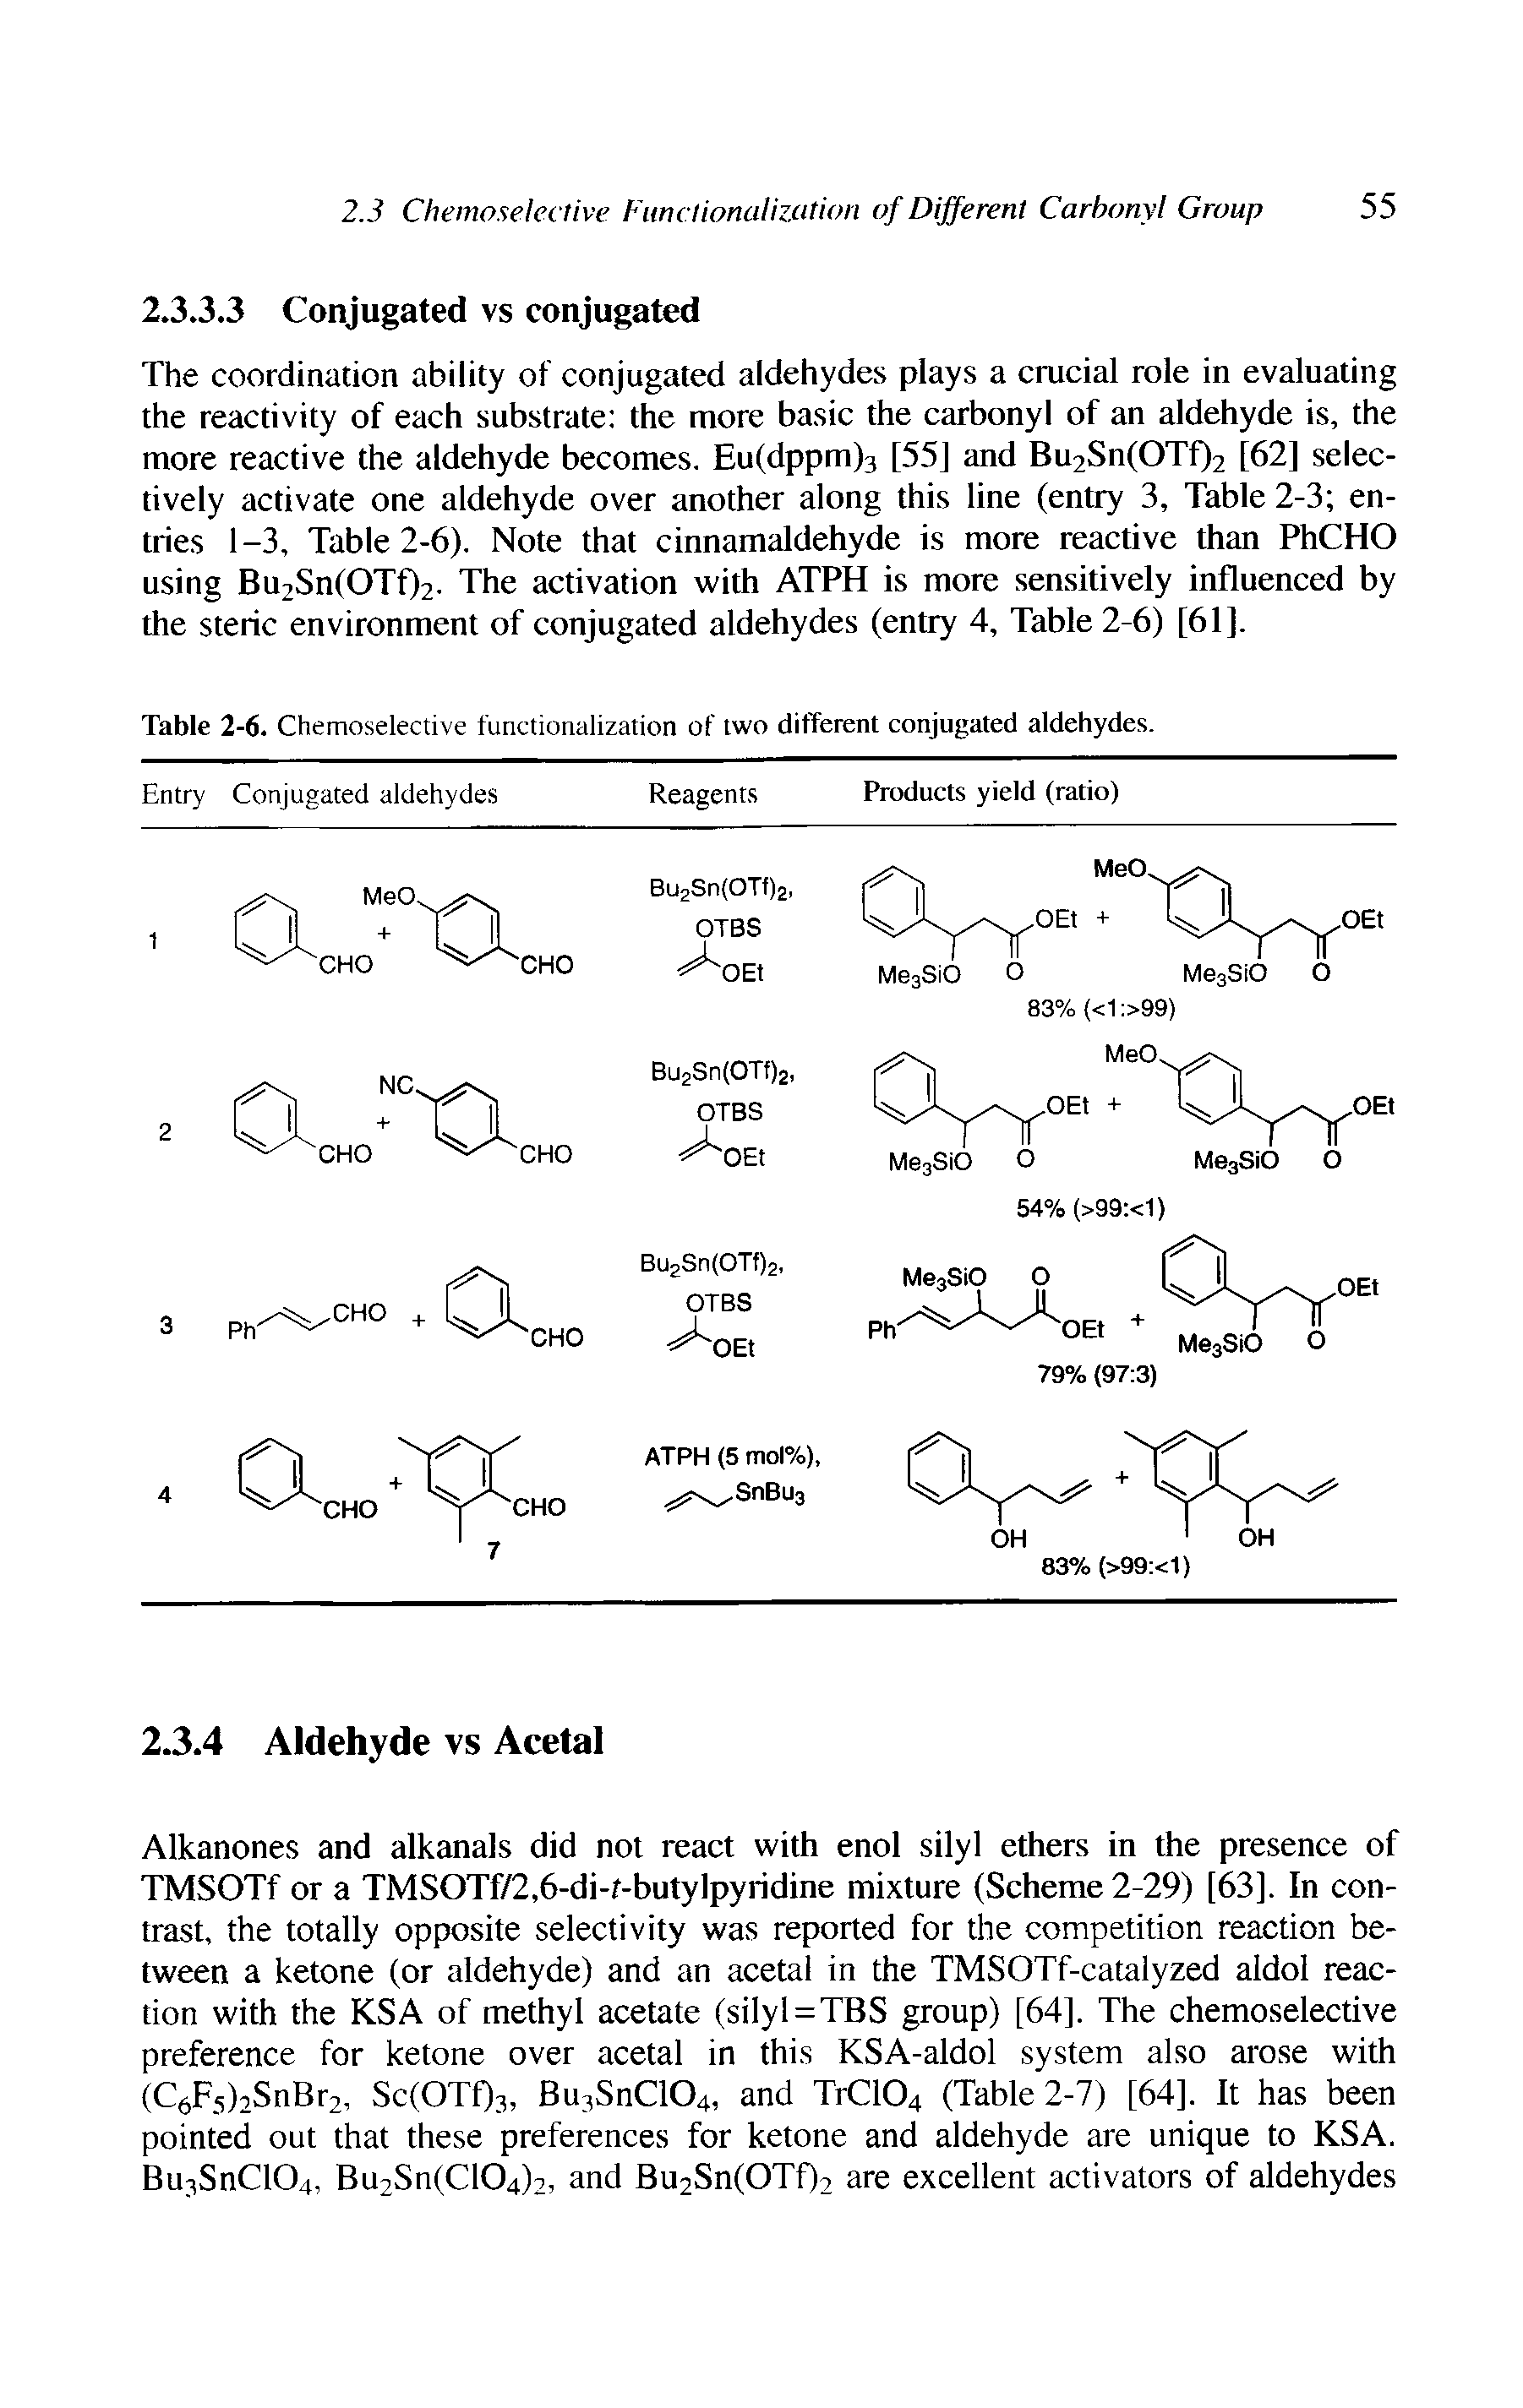 Table 2-6. Chemoselective functionalization of two different conjugated aldehydes.